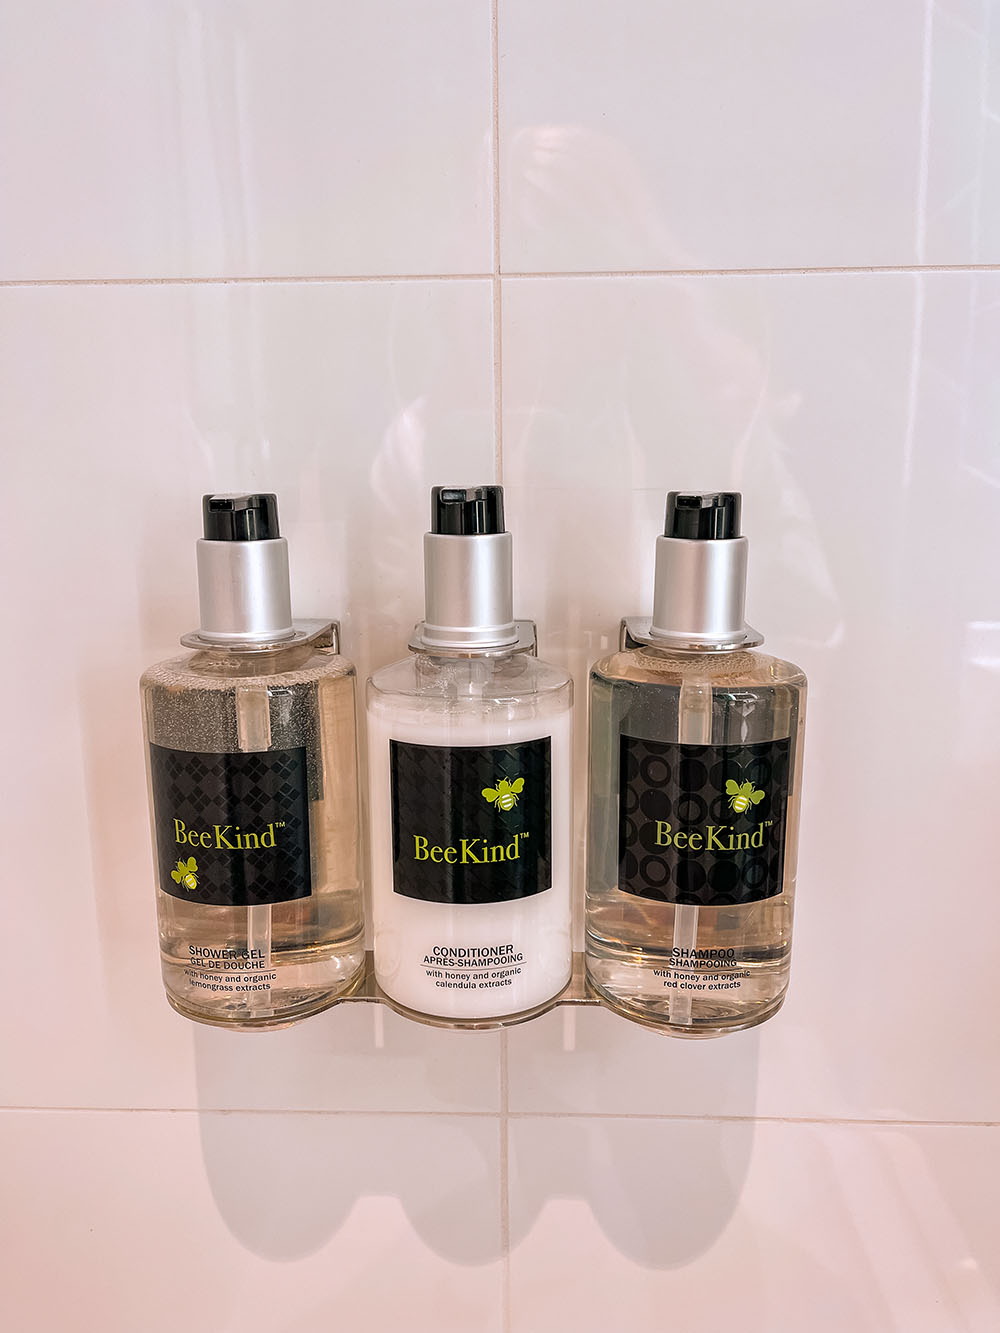 Planning a trip to Montreal soon? You'll definitely want to check out the brand new Humaniti Hotel Montreal! Located in the heart of downtown, this hotel is a true oasis in the city. Read on to find out why I loved it so much, and why you'll definitely want to book your next overnight stay in Montreal here! Pictured here: The bath products offered